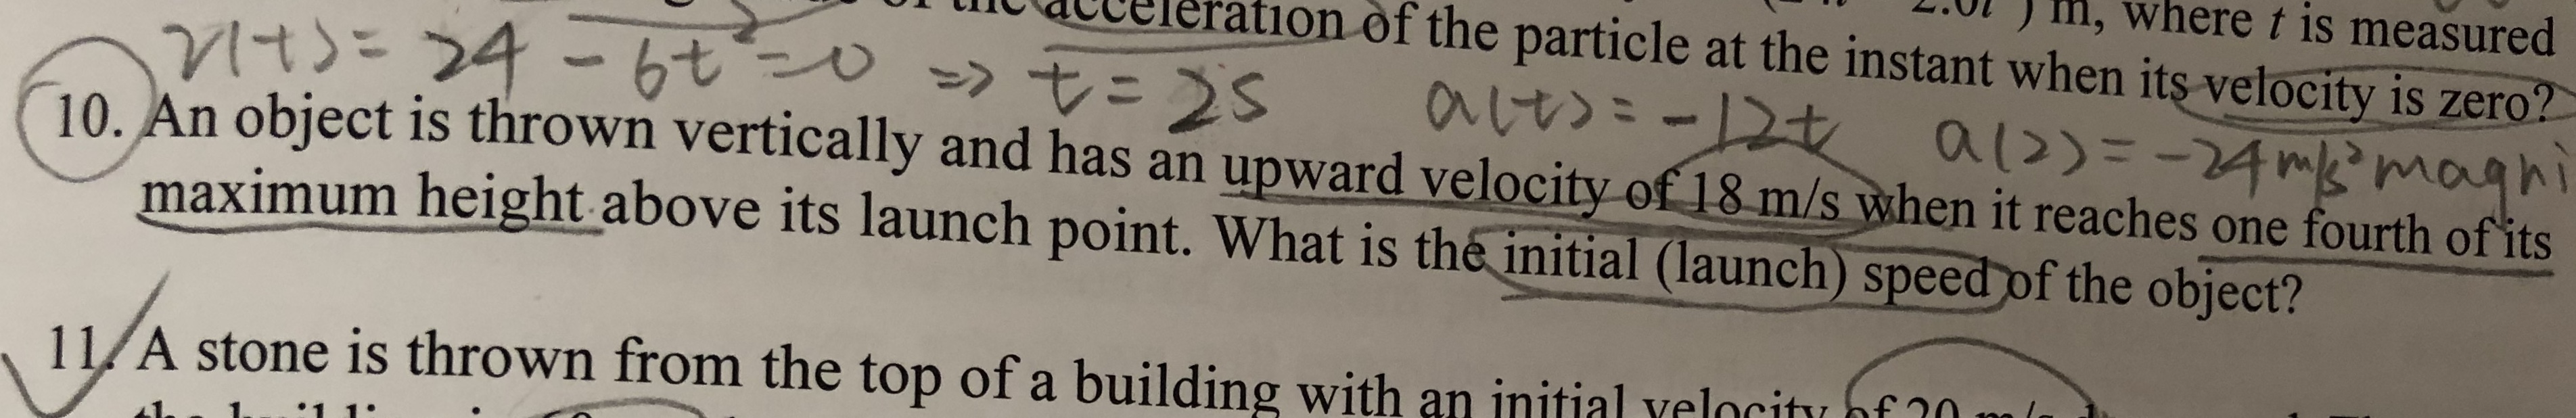 0l) m, where t is measured
lt Qtbereration of the particle at the instant when its velocity is zero?
1O. An object is thrown vertically and has an upward velocity of 18 m/s ywhen it reaches one fourth ofits
maximum height above its launch point. What is the initial (launch) speedof the object?
11/A stone is thrown from the top of a building with an initial yelociti nf 10
nitial velocity of
